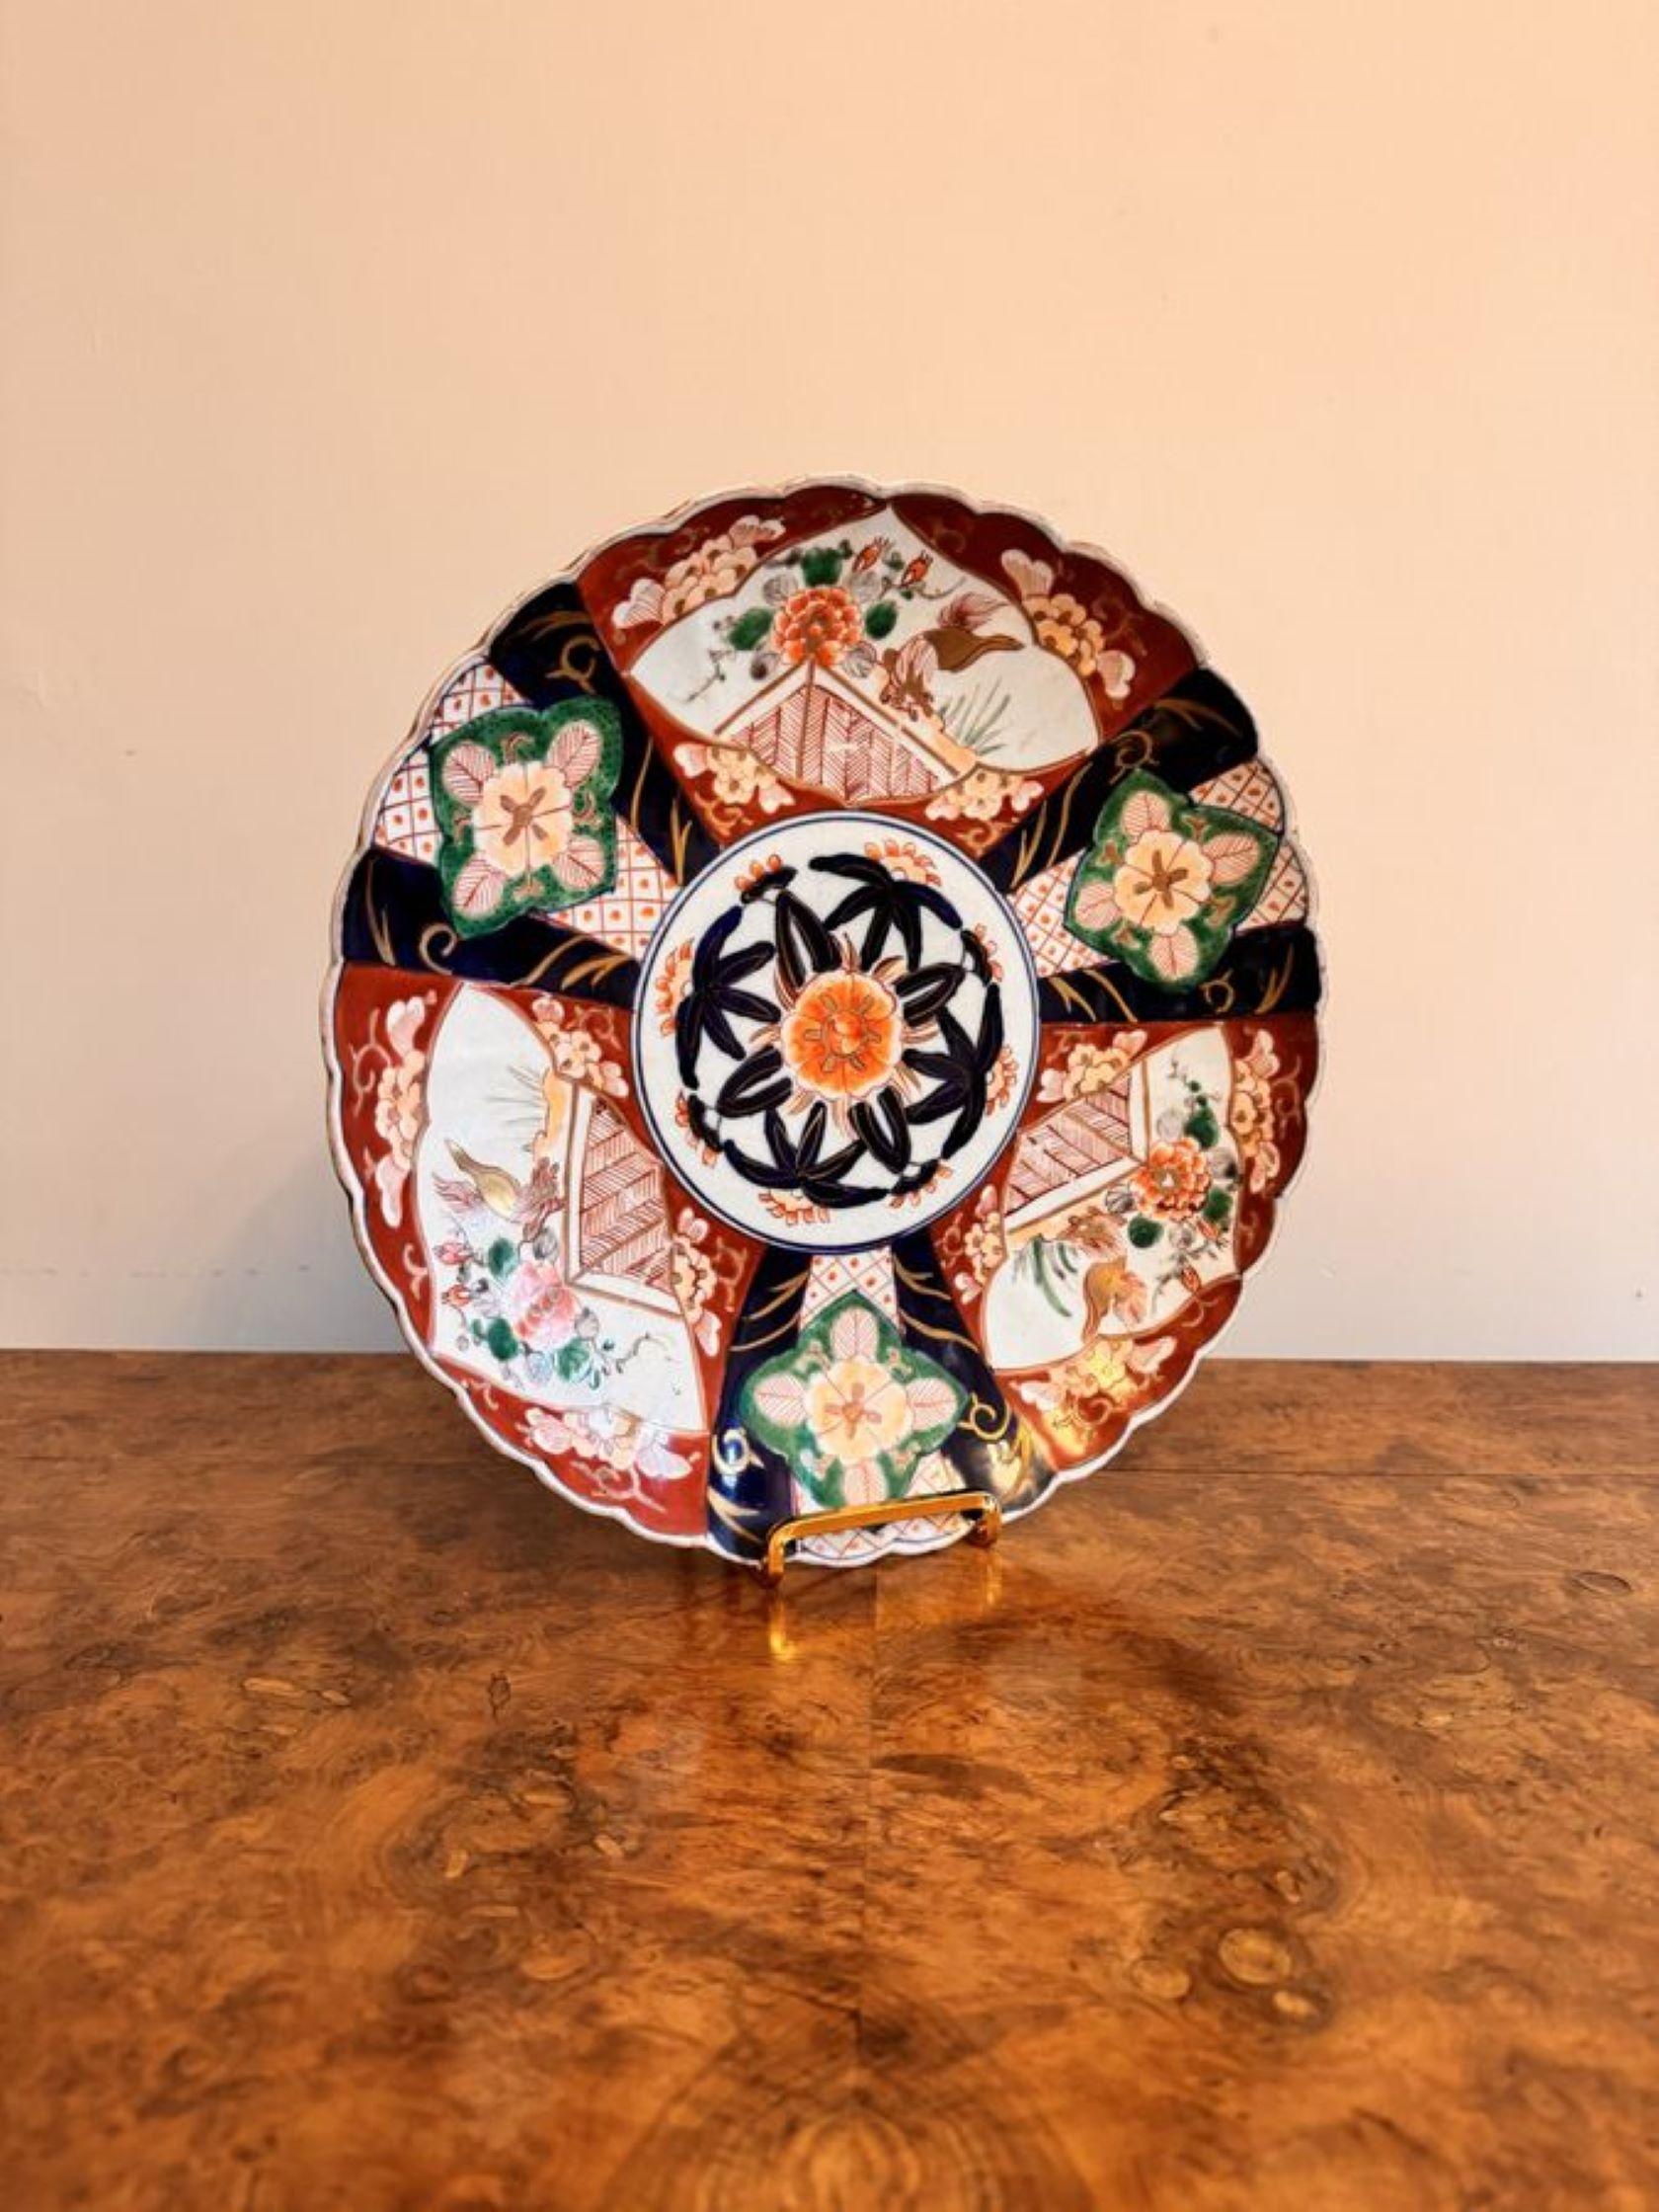 Lovely antique Japanese imari plate, having a quality Japanese imari plate with a patterned centre surrounded by panels with flowers and patterns in fantastic hand painted vibrant red, blue, green, white and gold colours. 

D. 1900